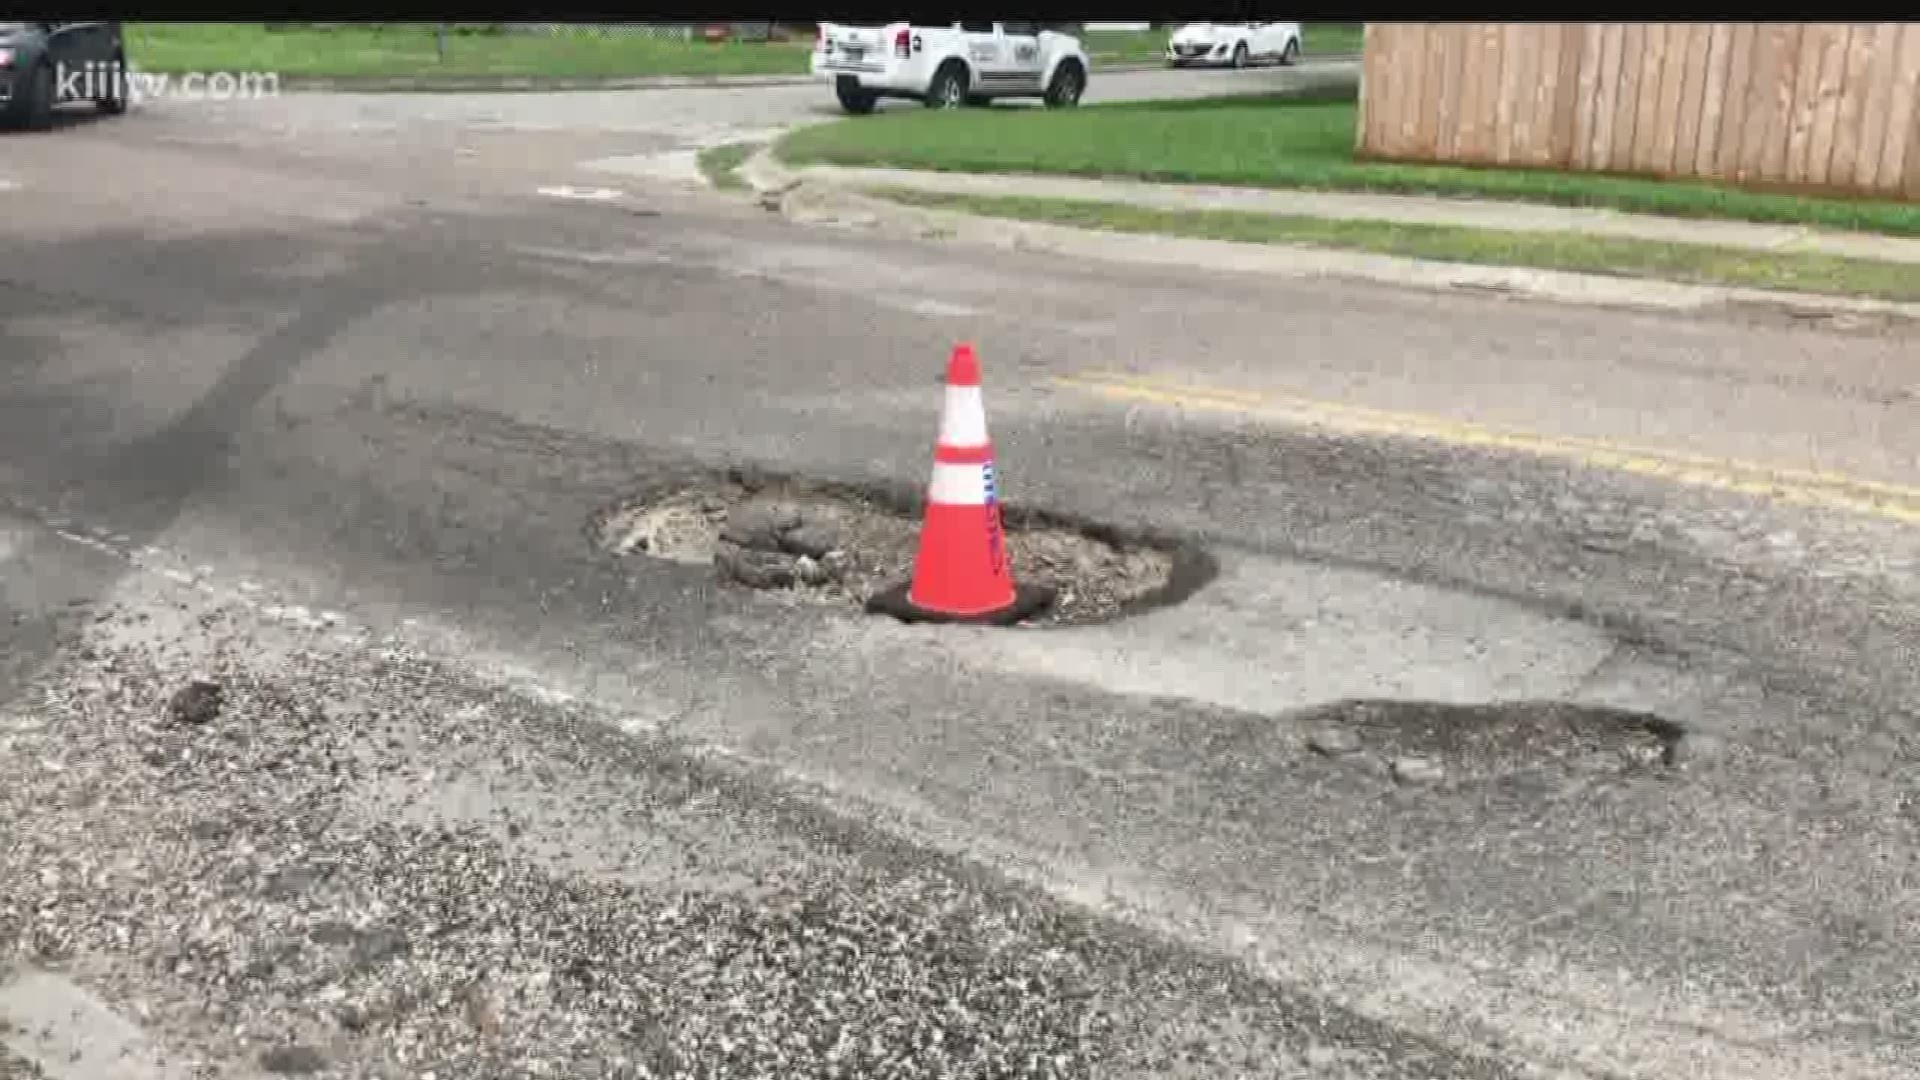 It's one of the inevitable problems that show up every time it rains heavily -- the dreaded pothole, many of which open up on streets that are already in disrepair.